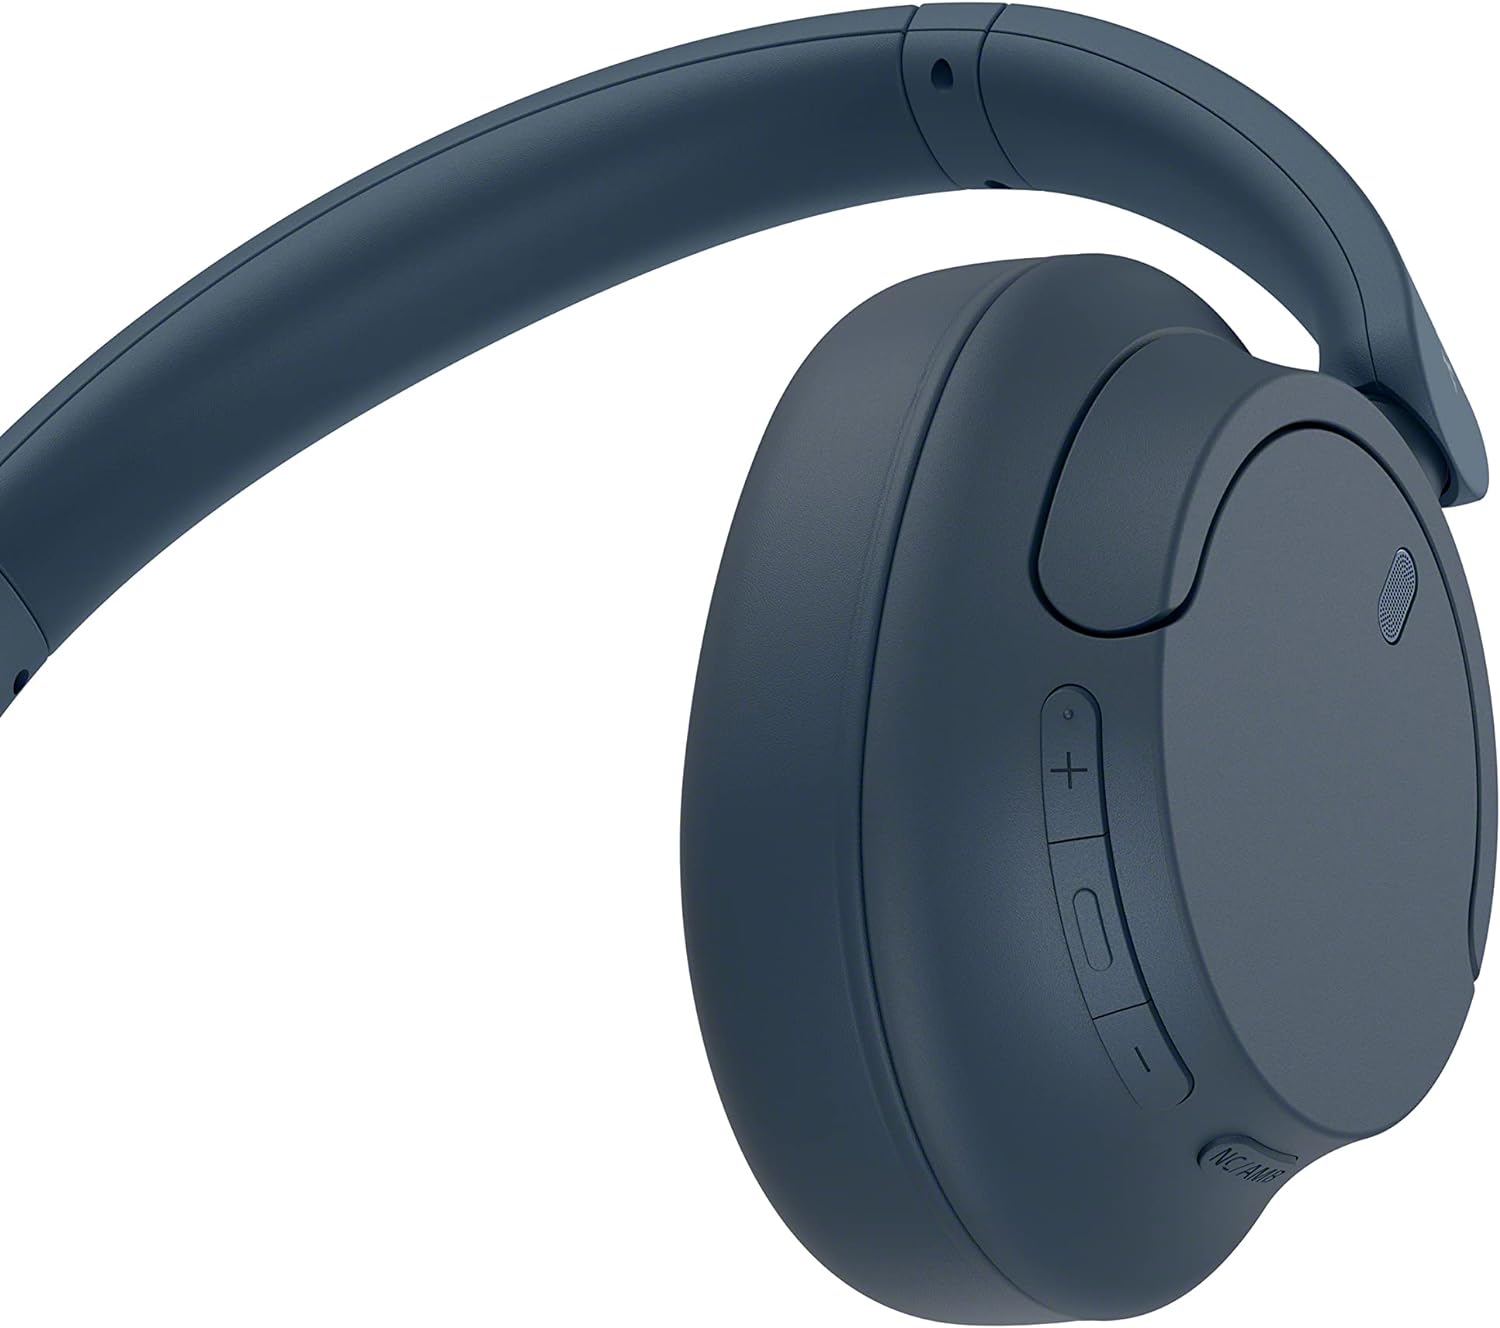 Sony WH-CH720N Noise Cancelling Wireless Headphones in Blue - Lightweight and comfortable design. 4548736143029